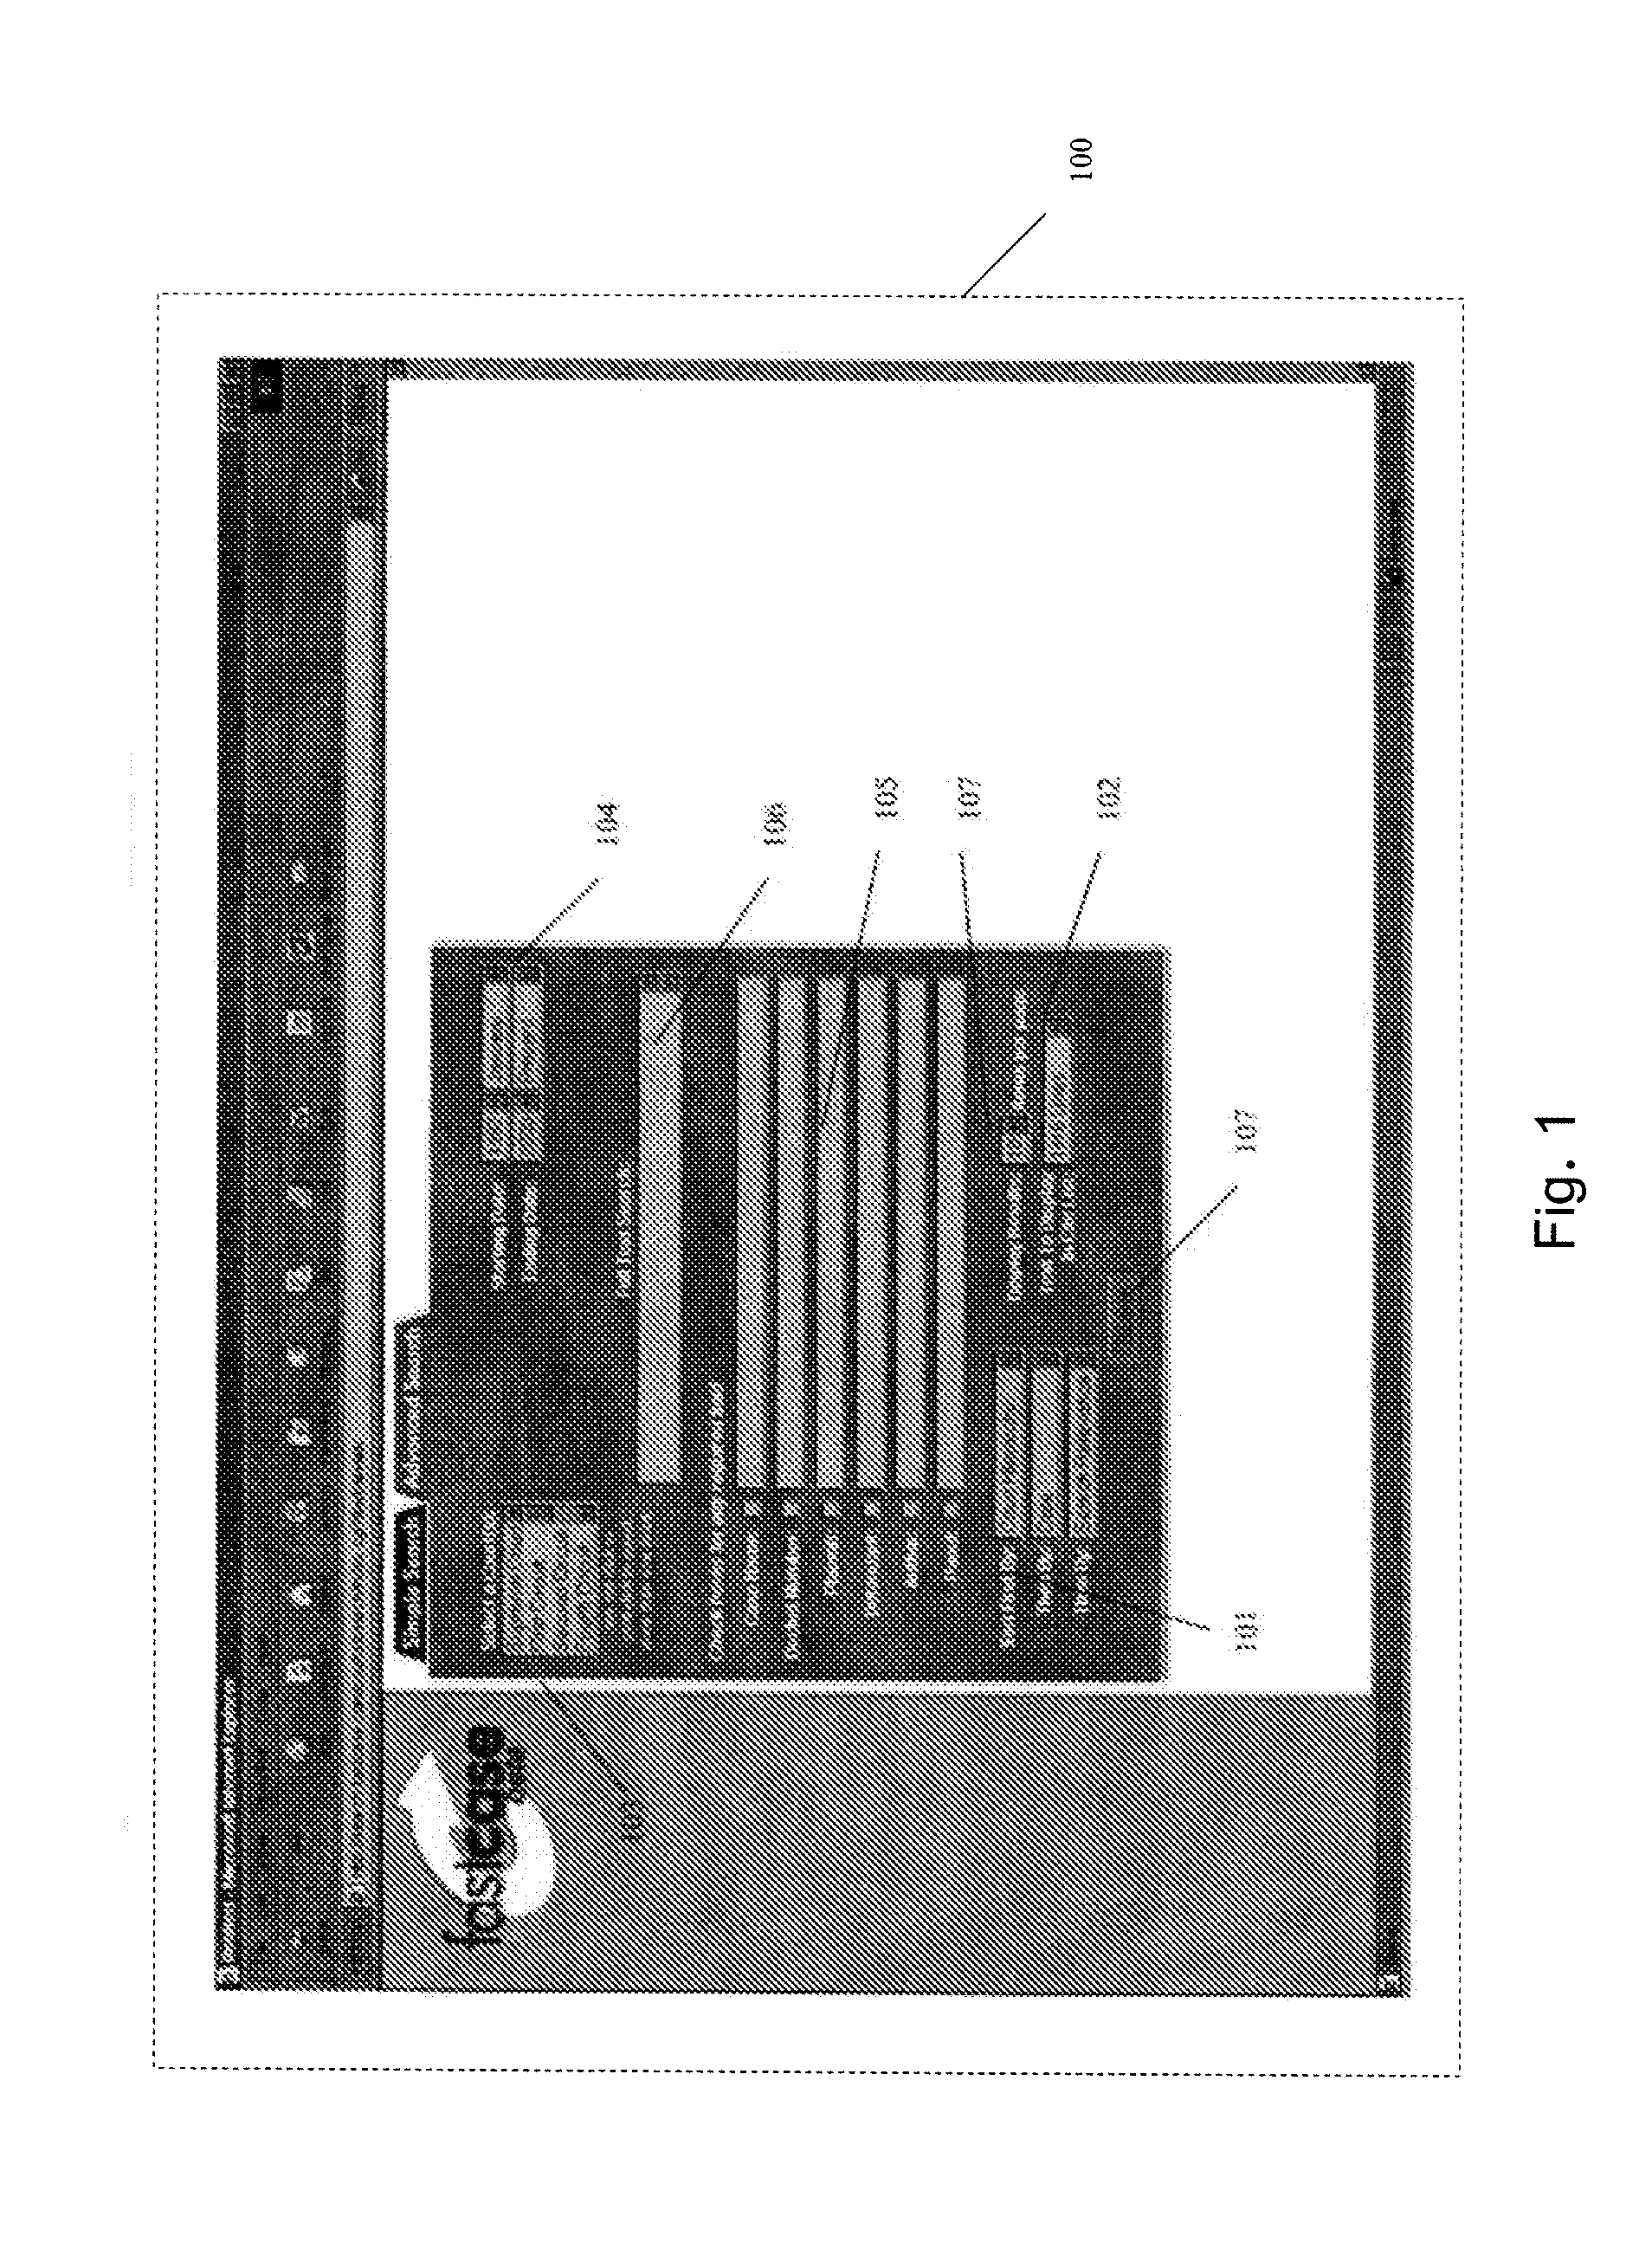 Apparatus and Method for Displaying Records Responsive to a Database Query